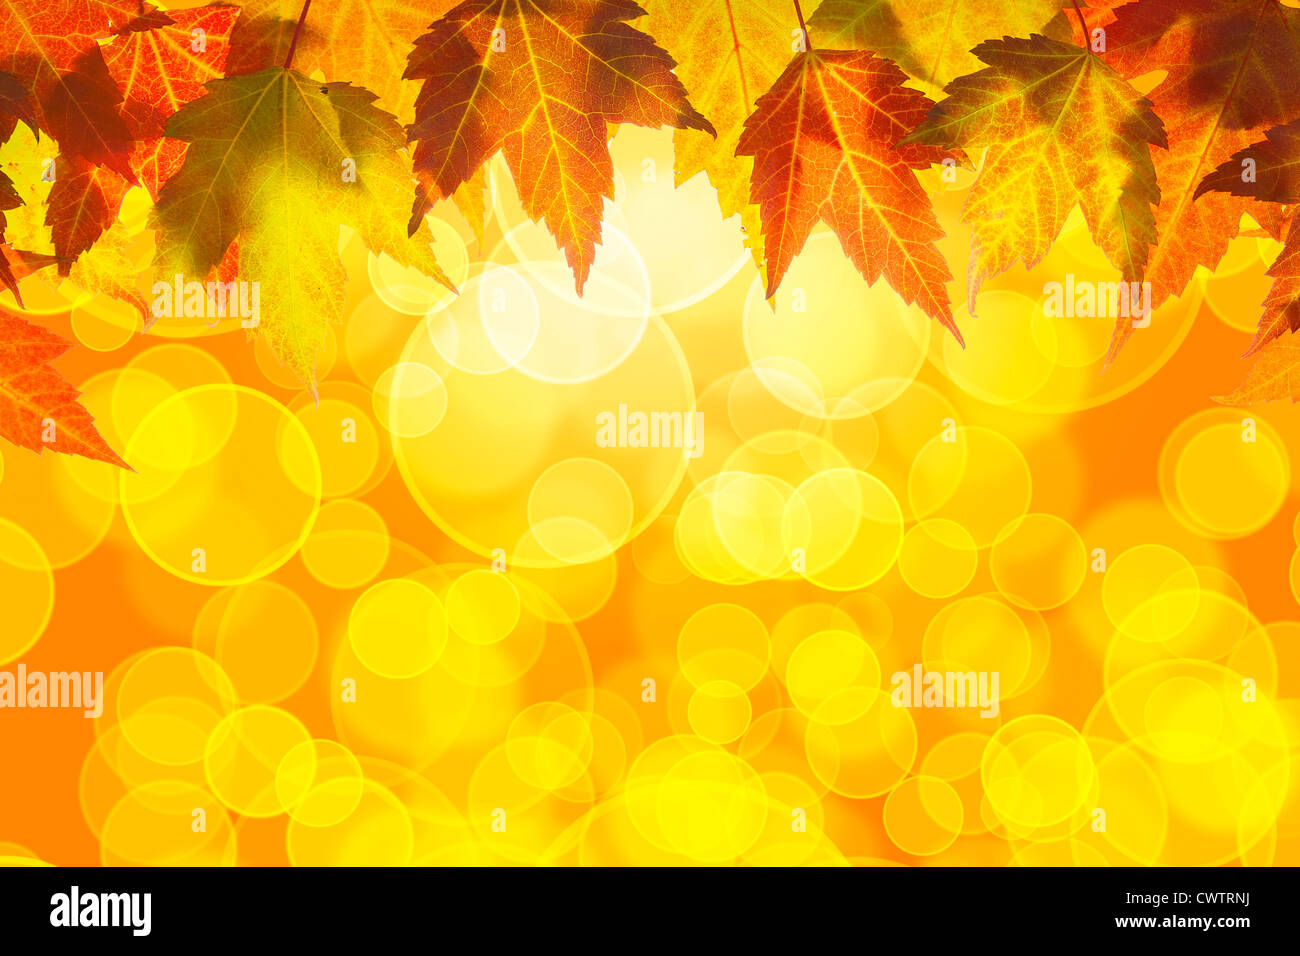 Hanging Fall Maple Tree Leaves Border Isolated on White Background Stock Photo